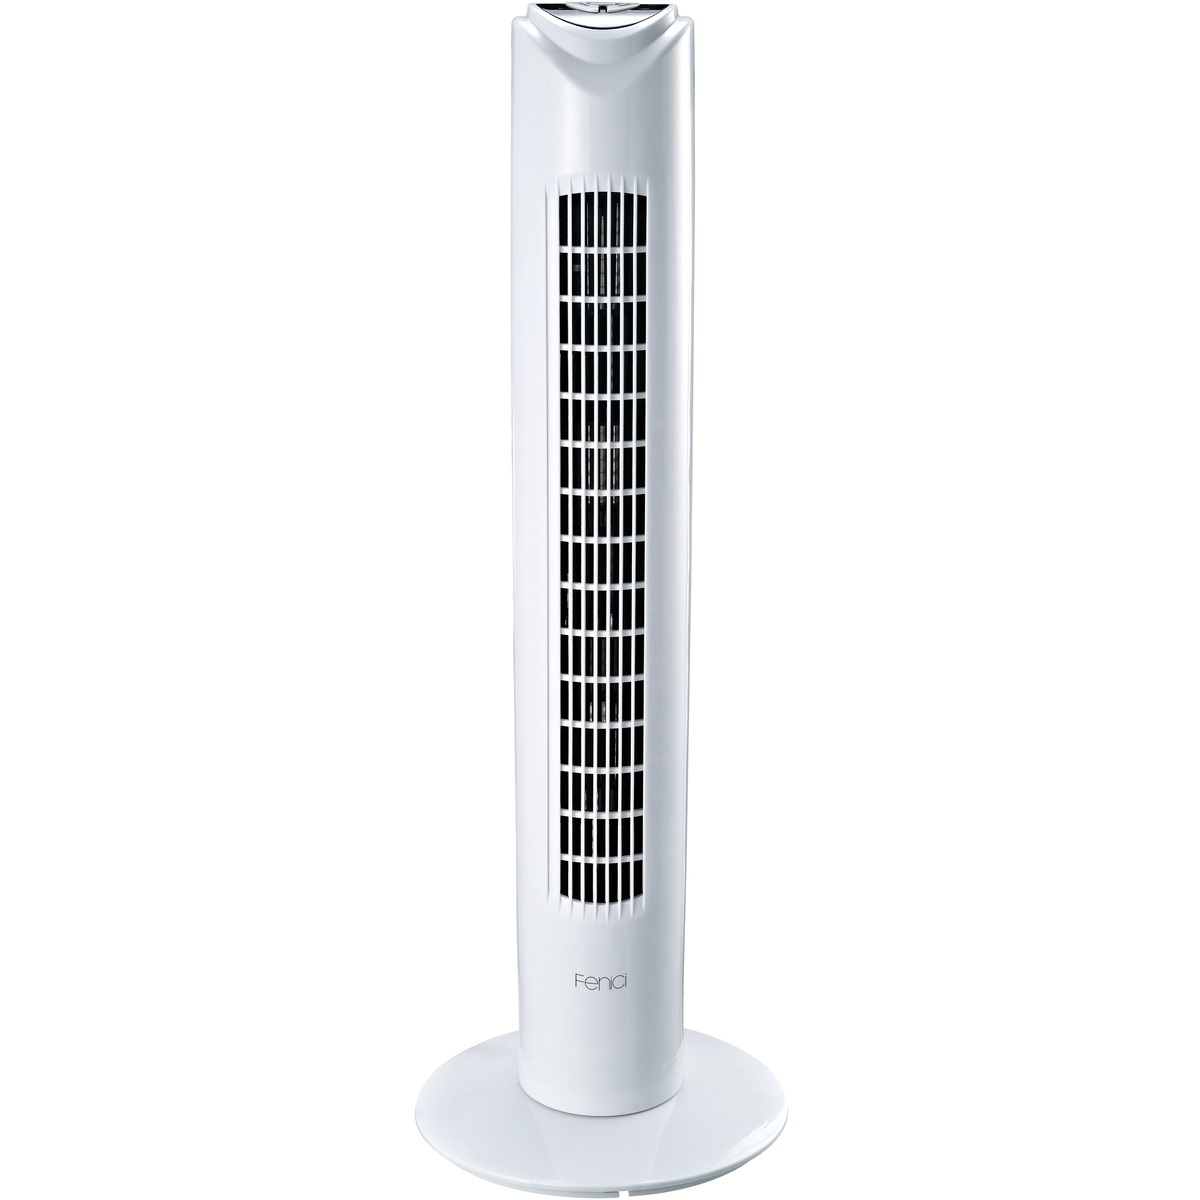 Fenici 80cm Tower Fan With Remote Control White Fyf29rb for dimensions 1200 X 1200